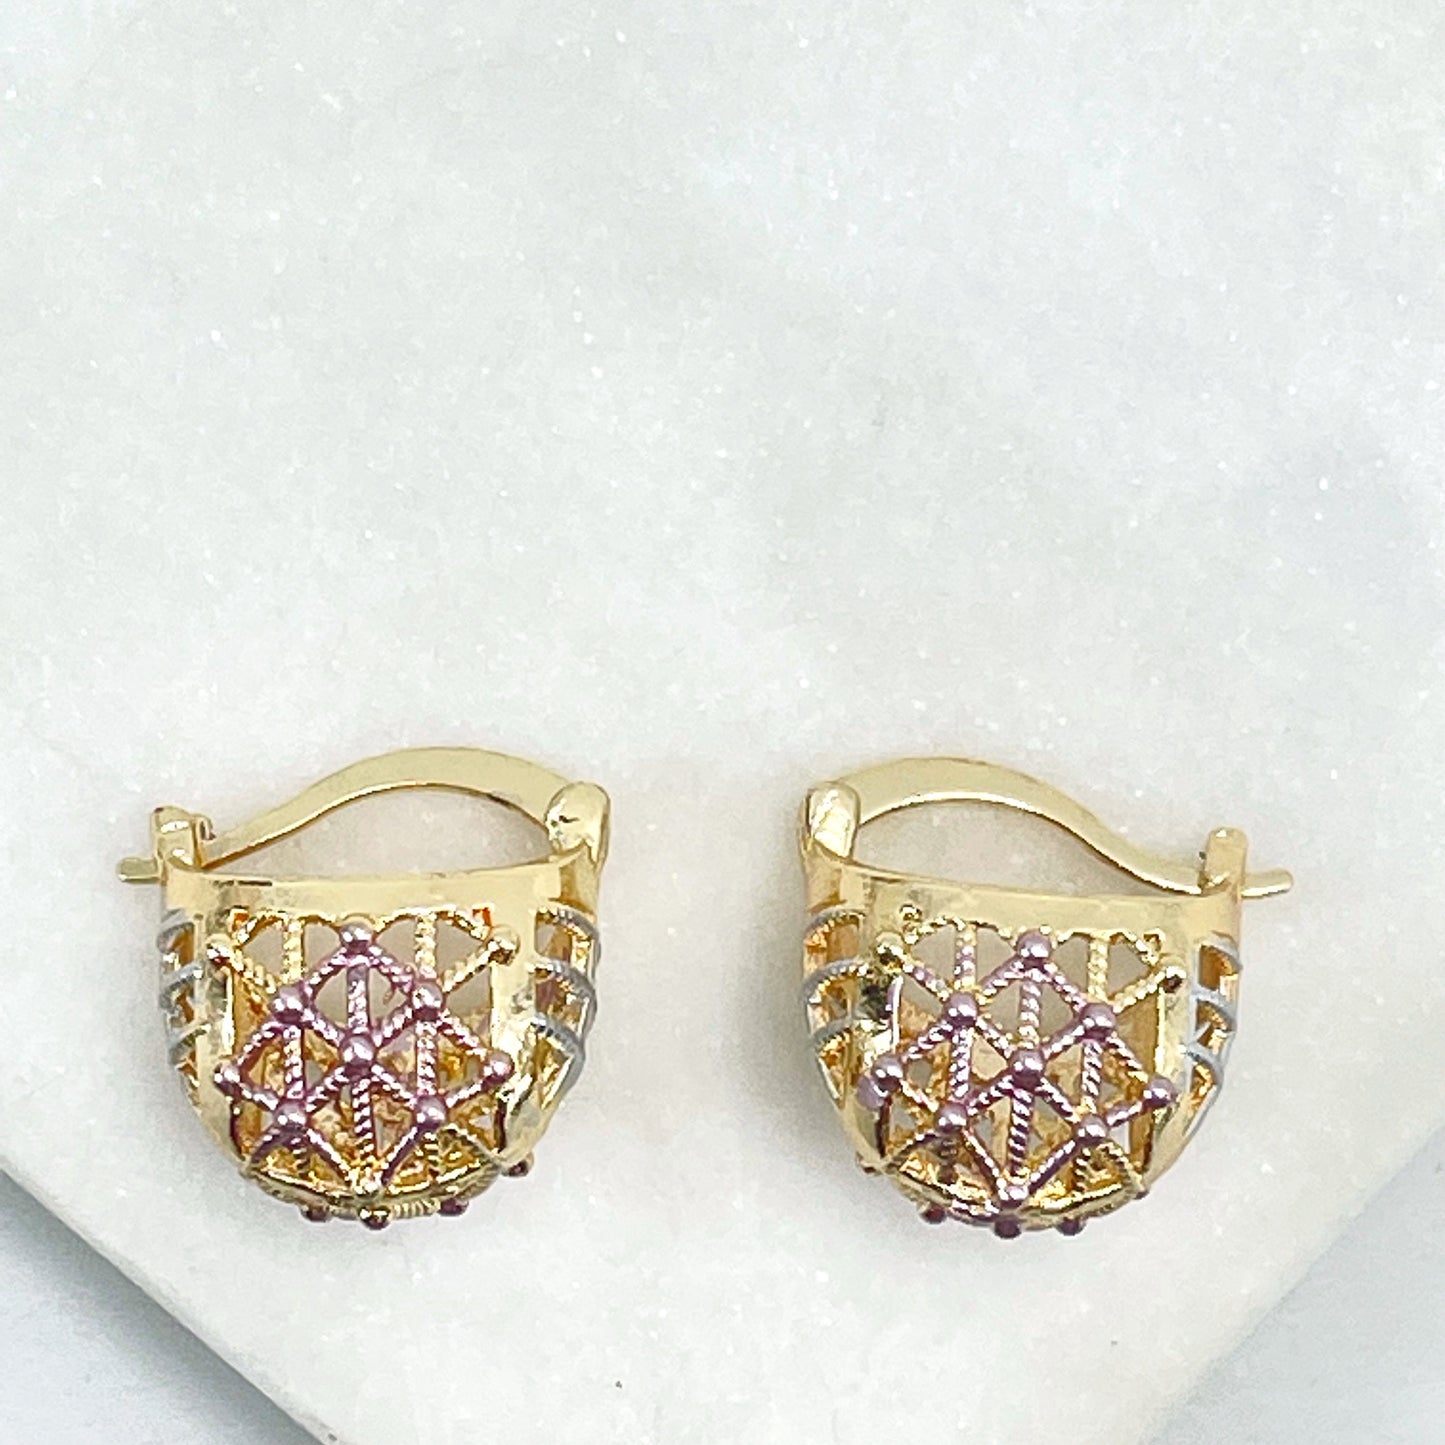 18k Gold Filled Two Tone Texturized Basket Shape Design Hoops Earrings, Wholesale Jewelry Making Supplies